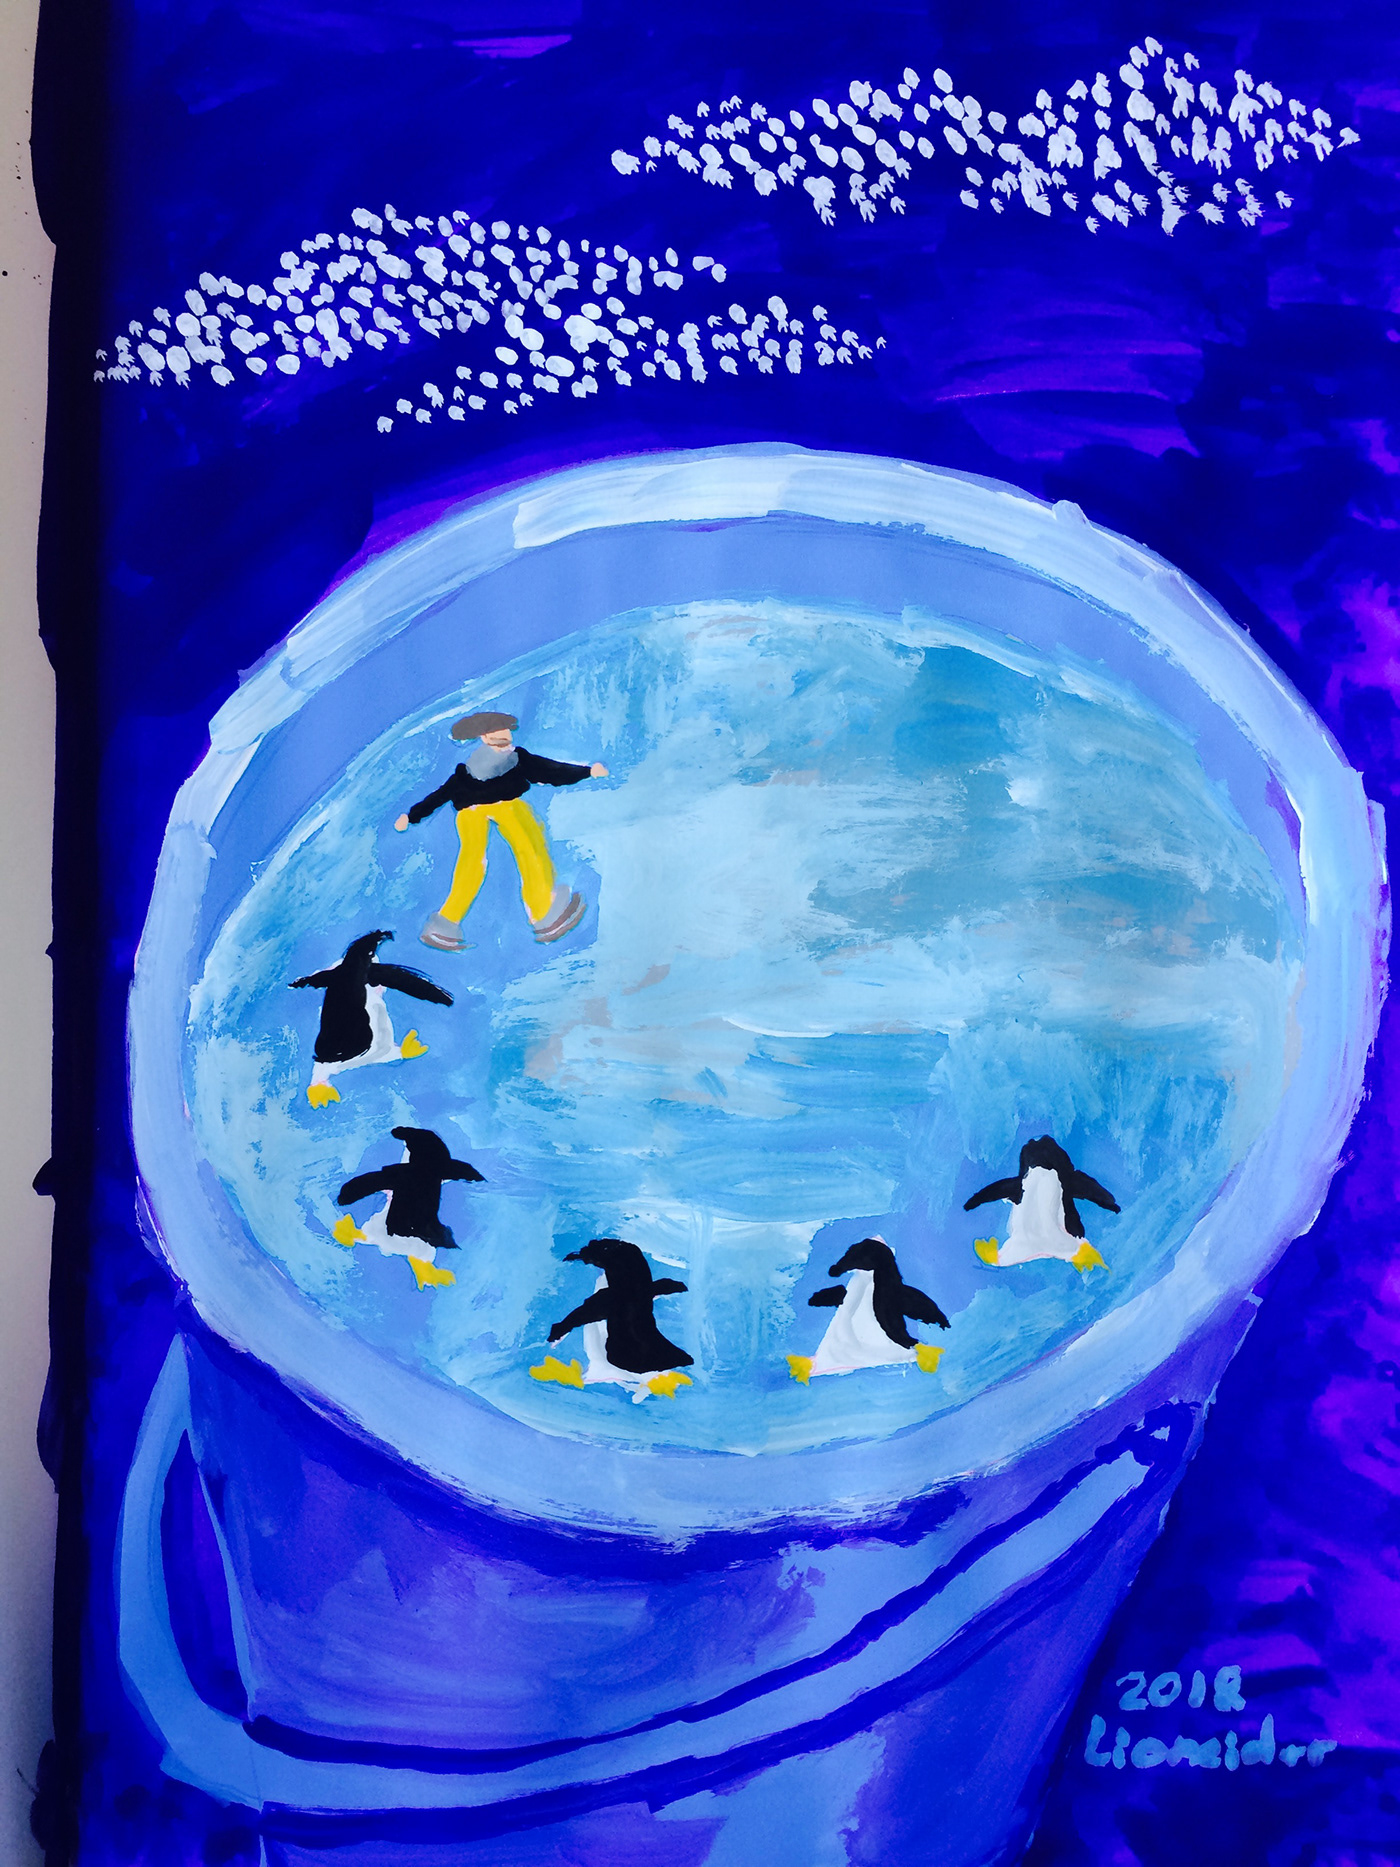 ILLUSTRATION  Drawing  ice bucket Skating penguin cold blue image art colorful Acrylic paint pictures painting   artwork Illustrator